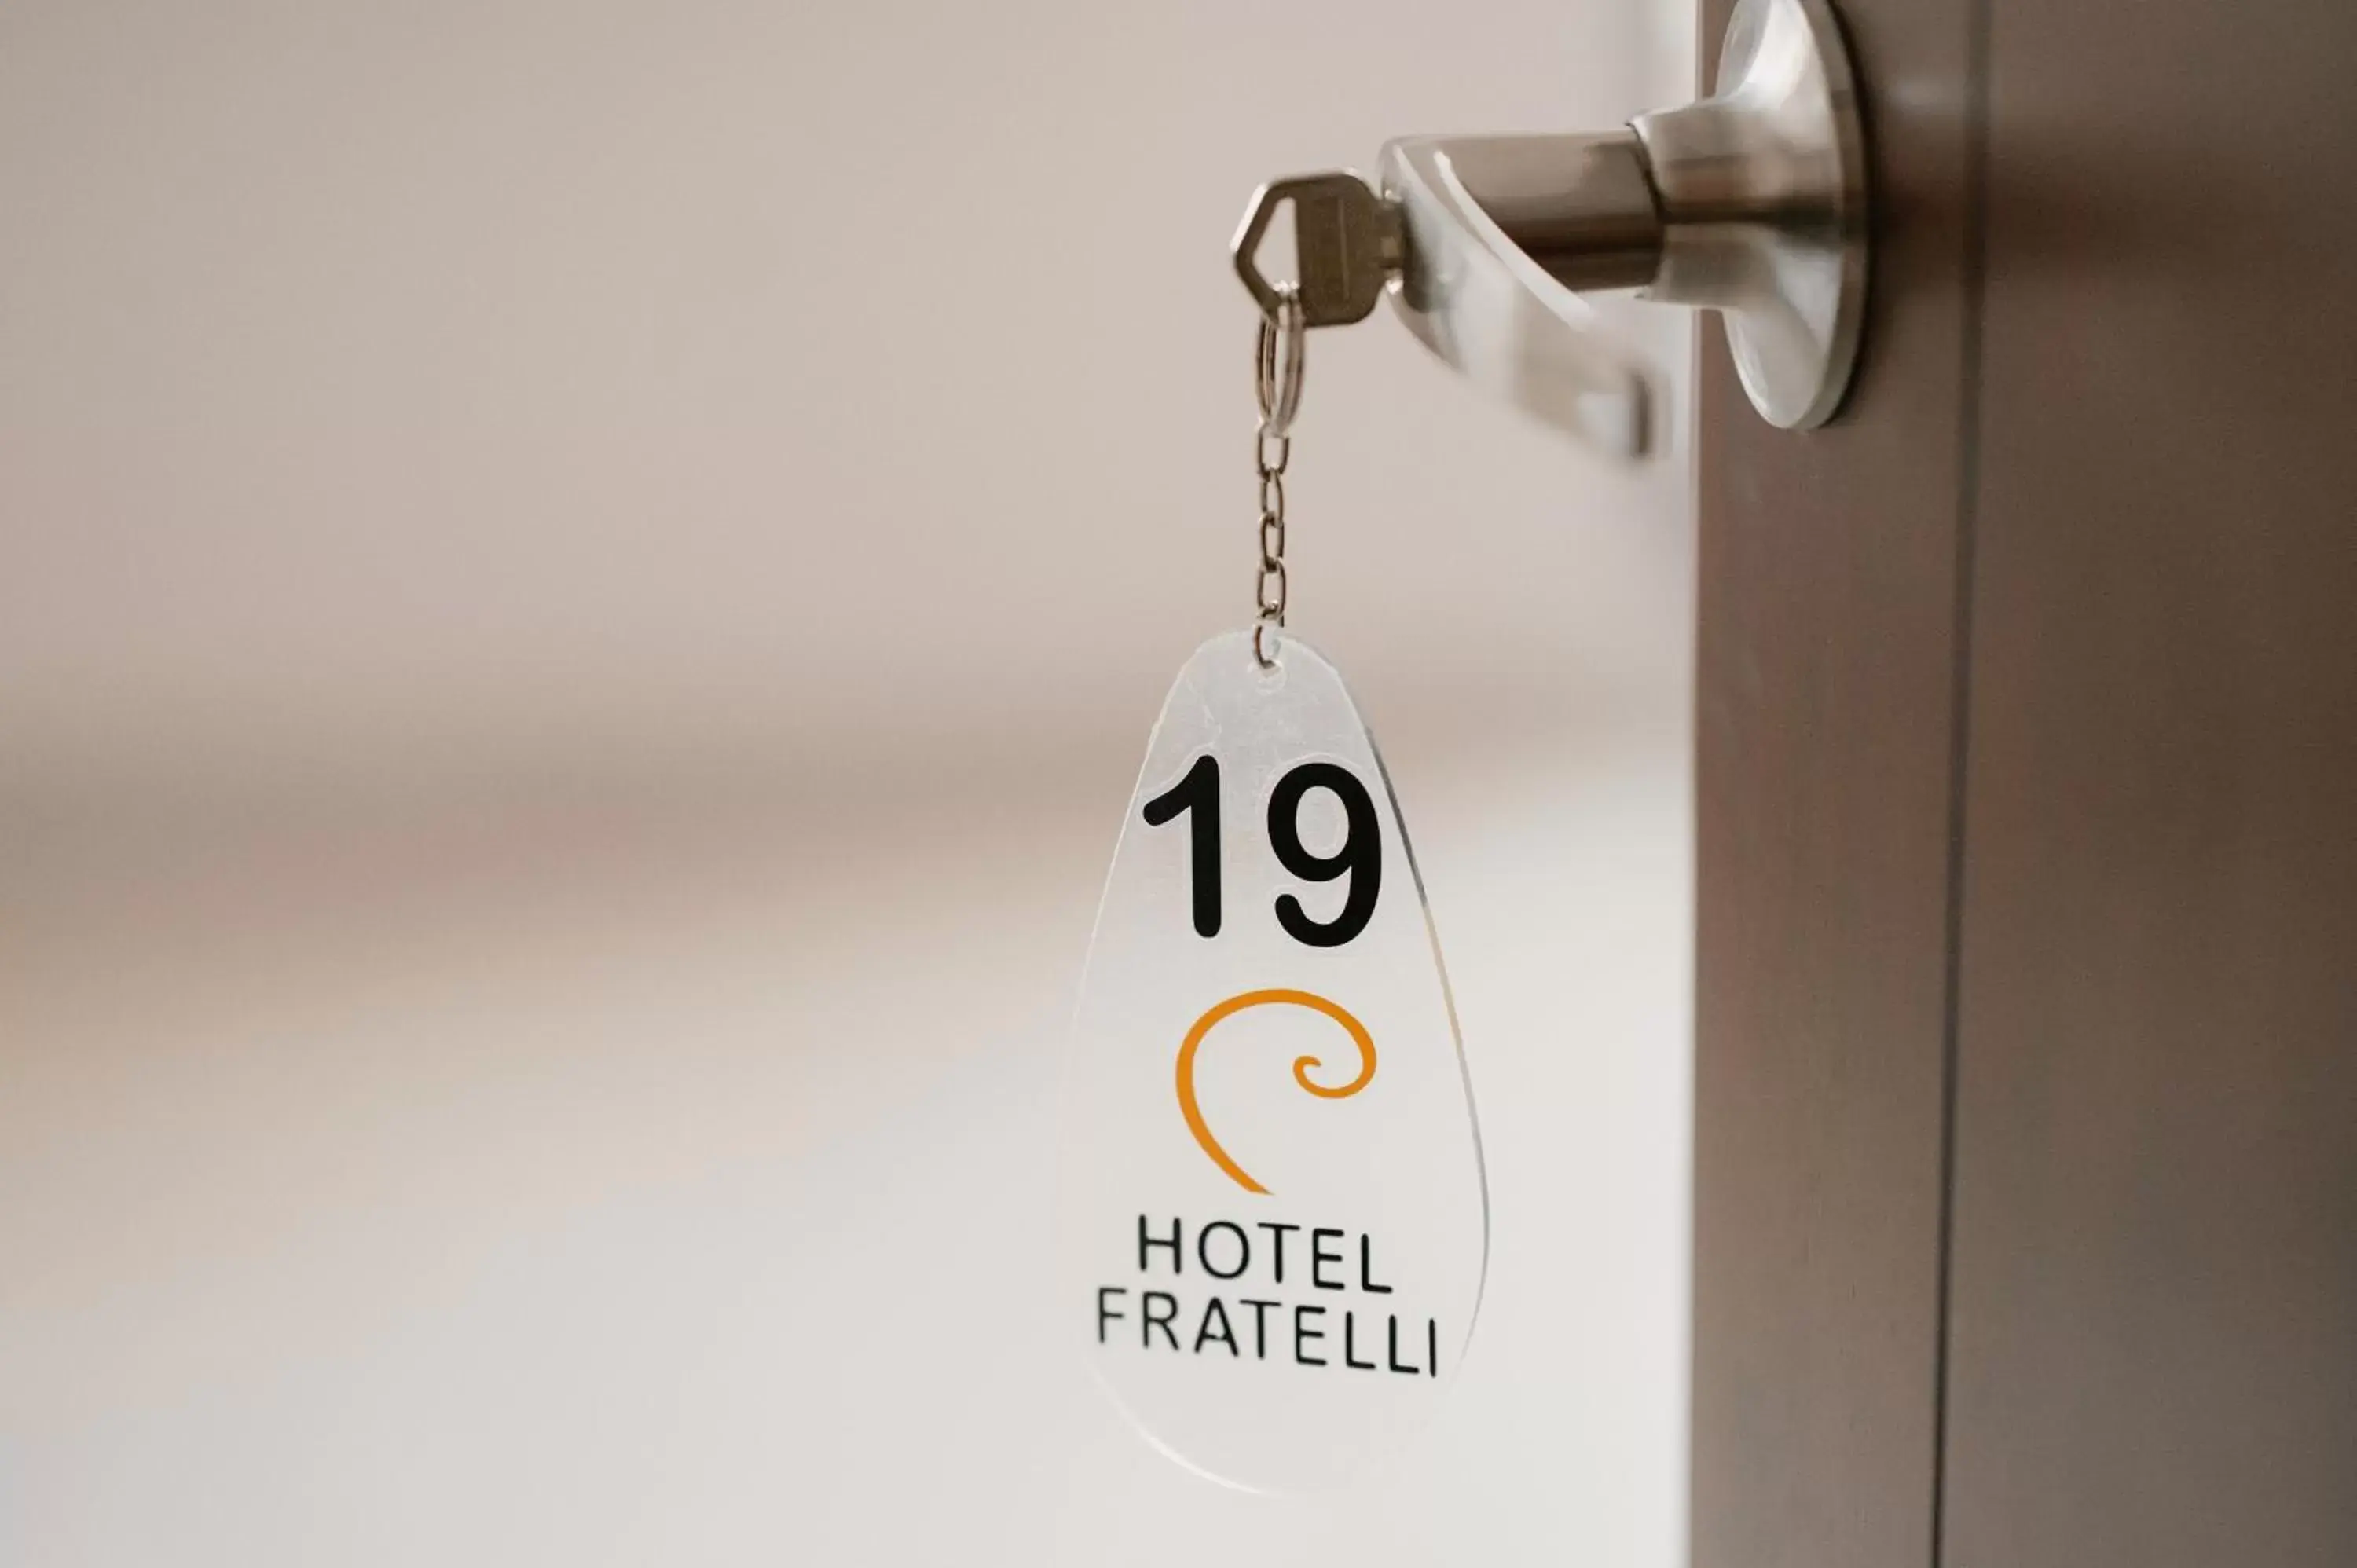 Property logo or sign in Hotel Fratelli